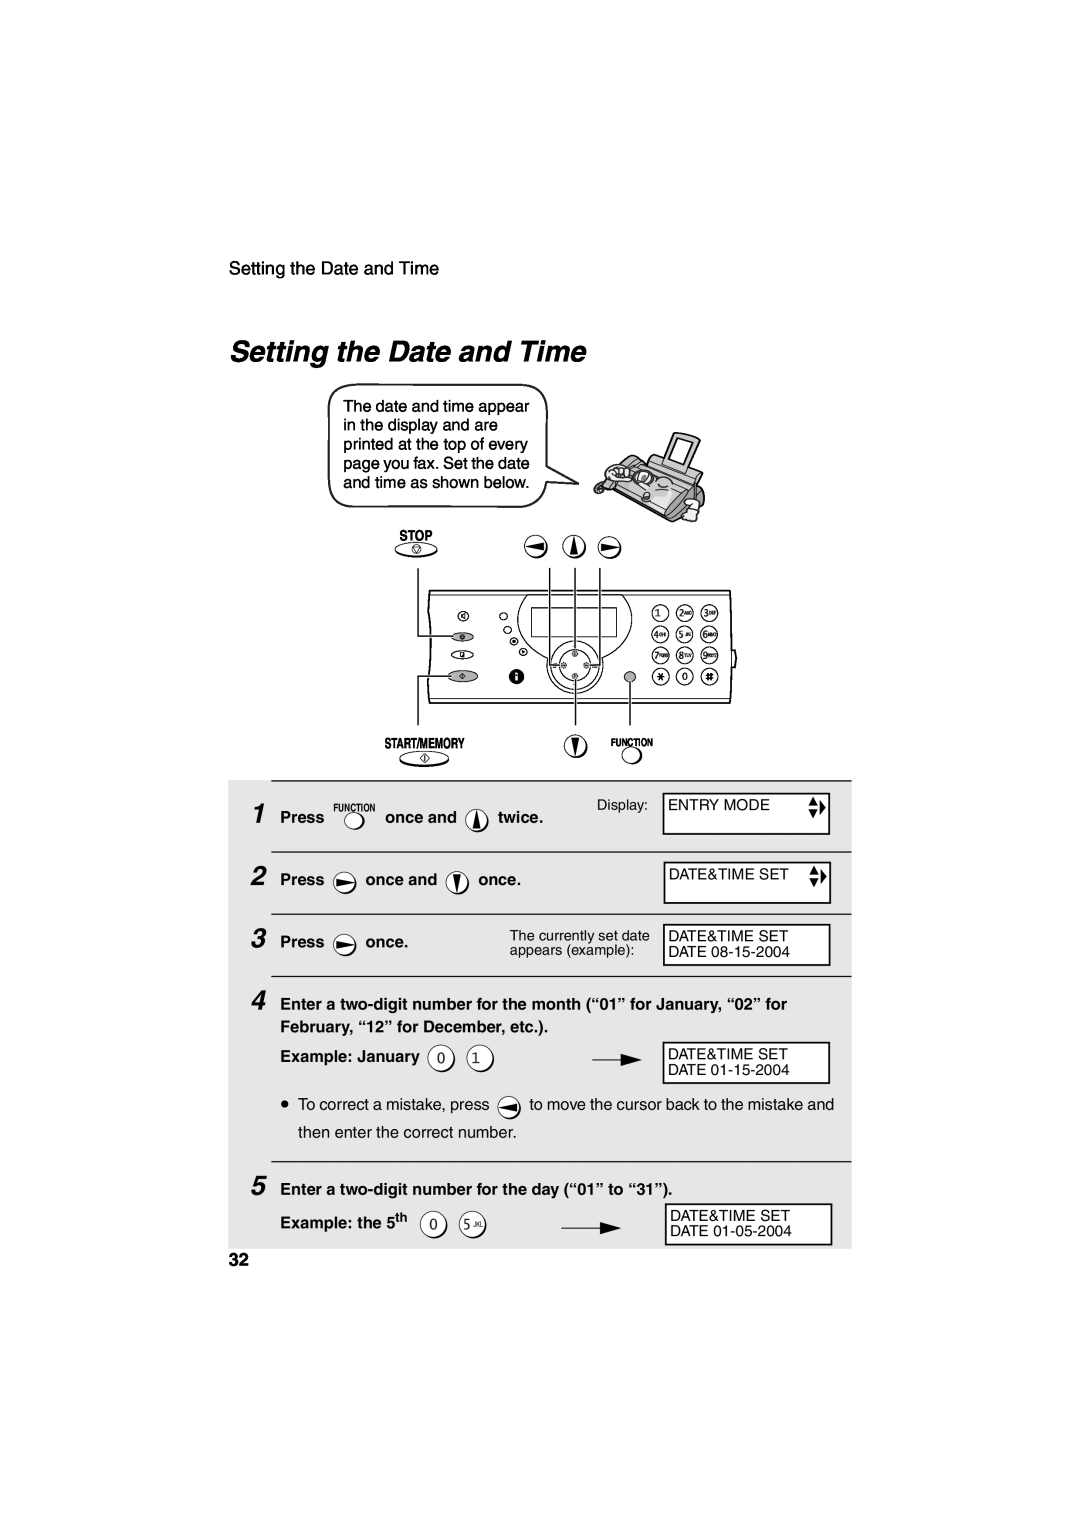 Sharp UX-CD600 operation manual Setting the Date and Time 